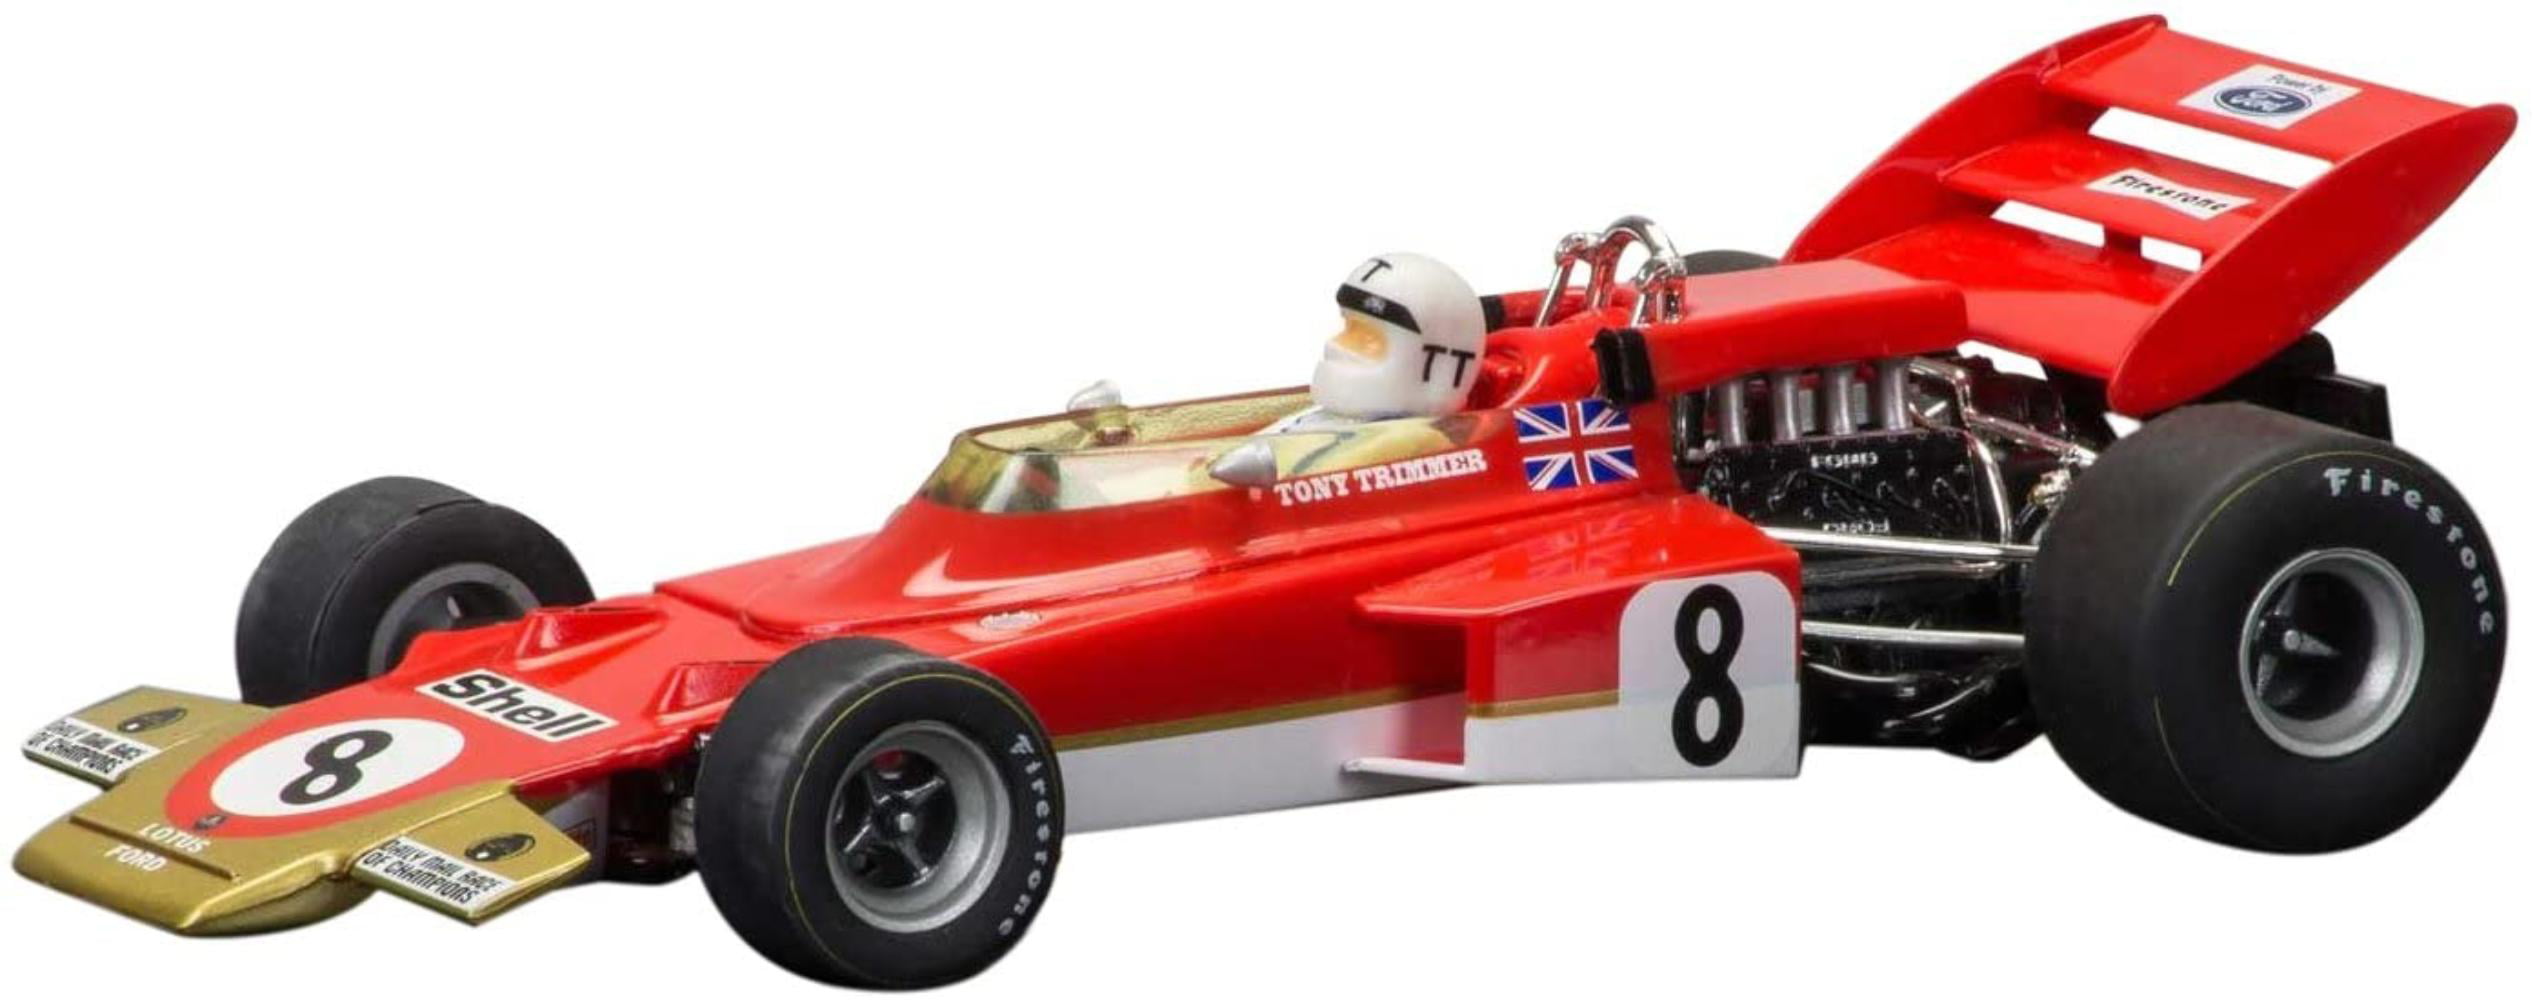 Scalextric C3657A Lotus 72 Tony Trimmer Legends Limited Edition Slot Car 1:32 Scale 